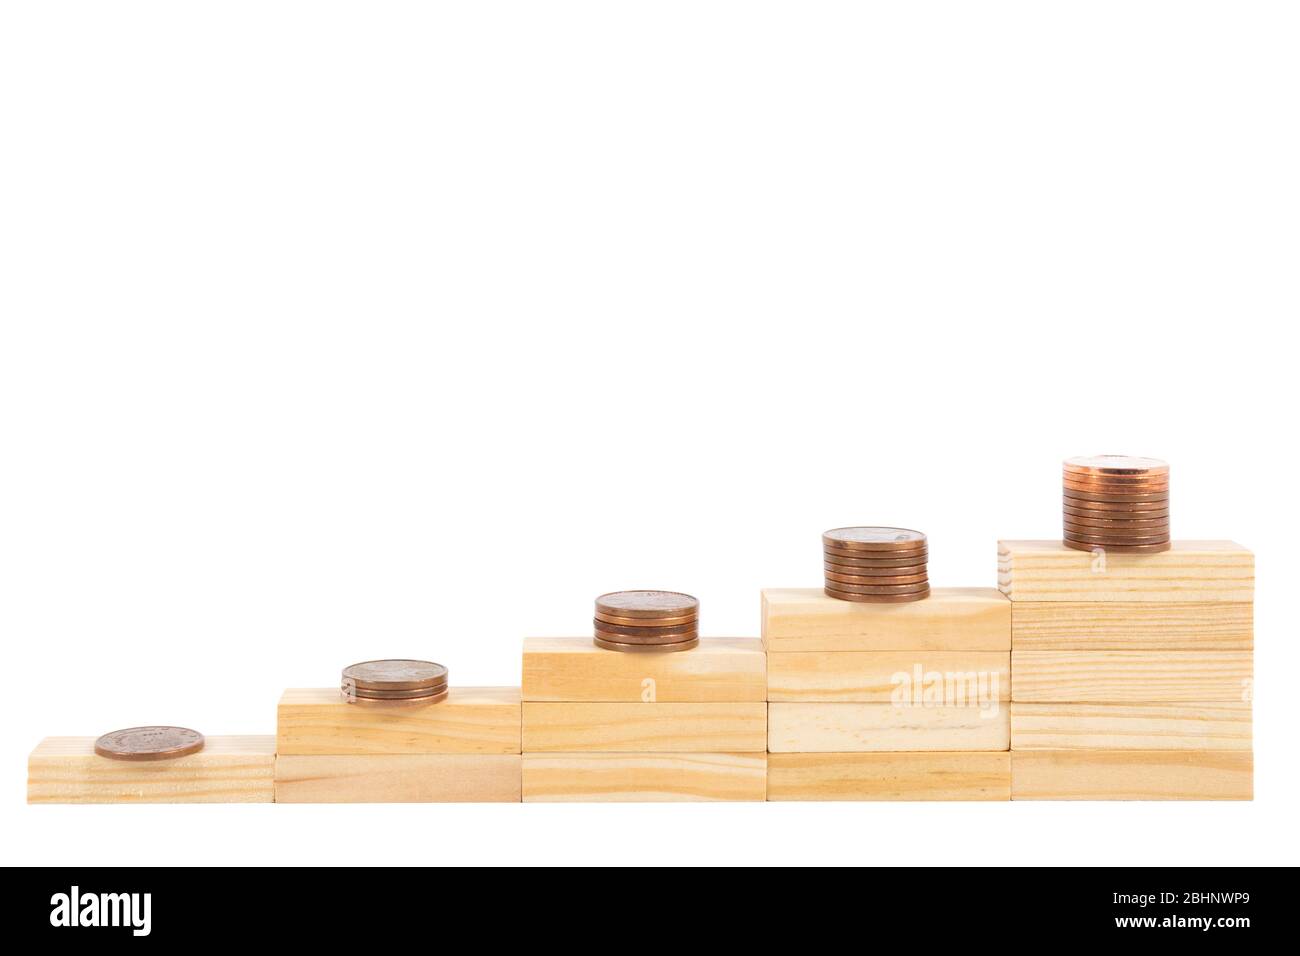 Economic climbing ladder with coins. Business, finance, investment and savings concept Stock Photo